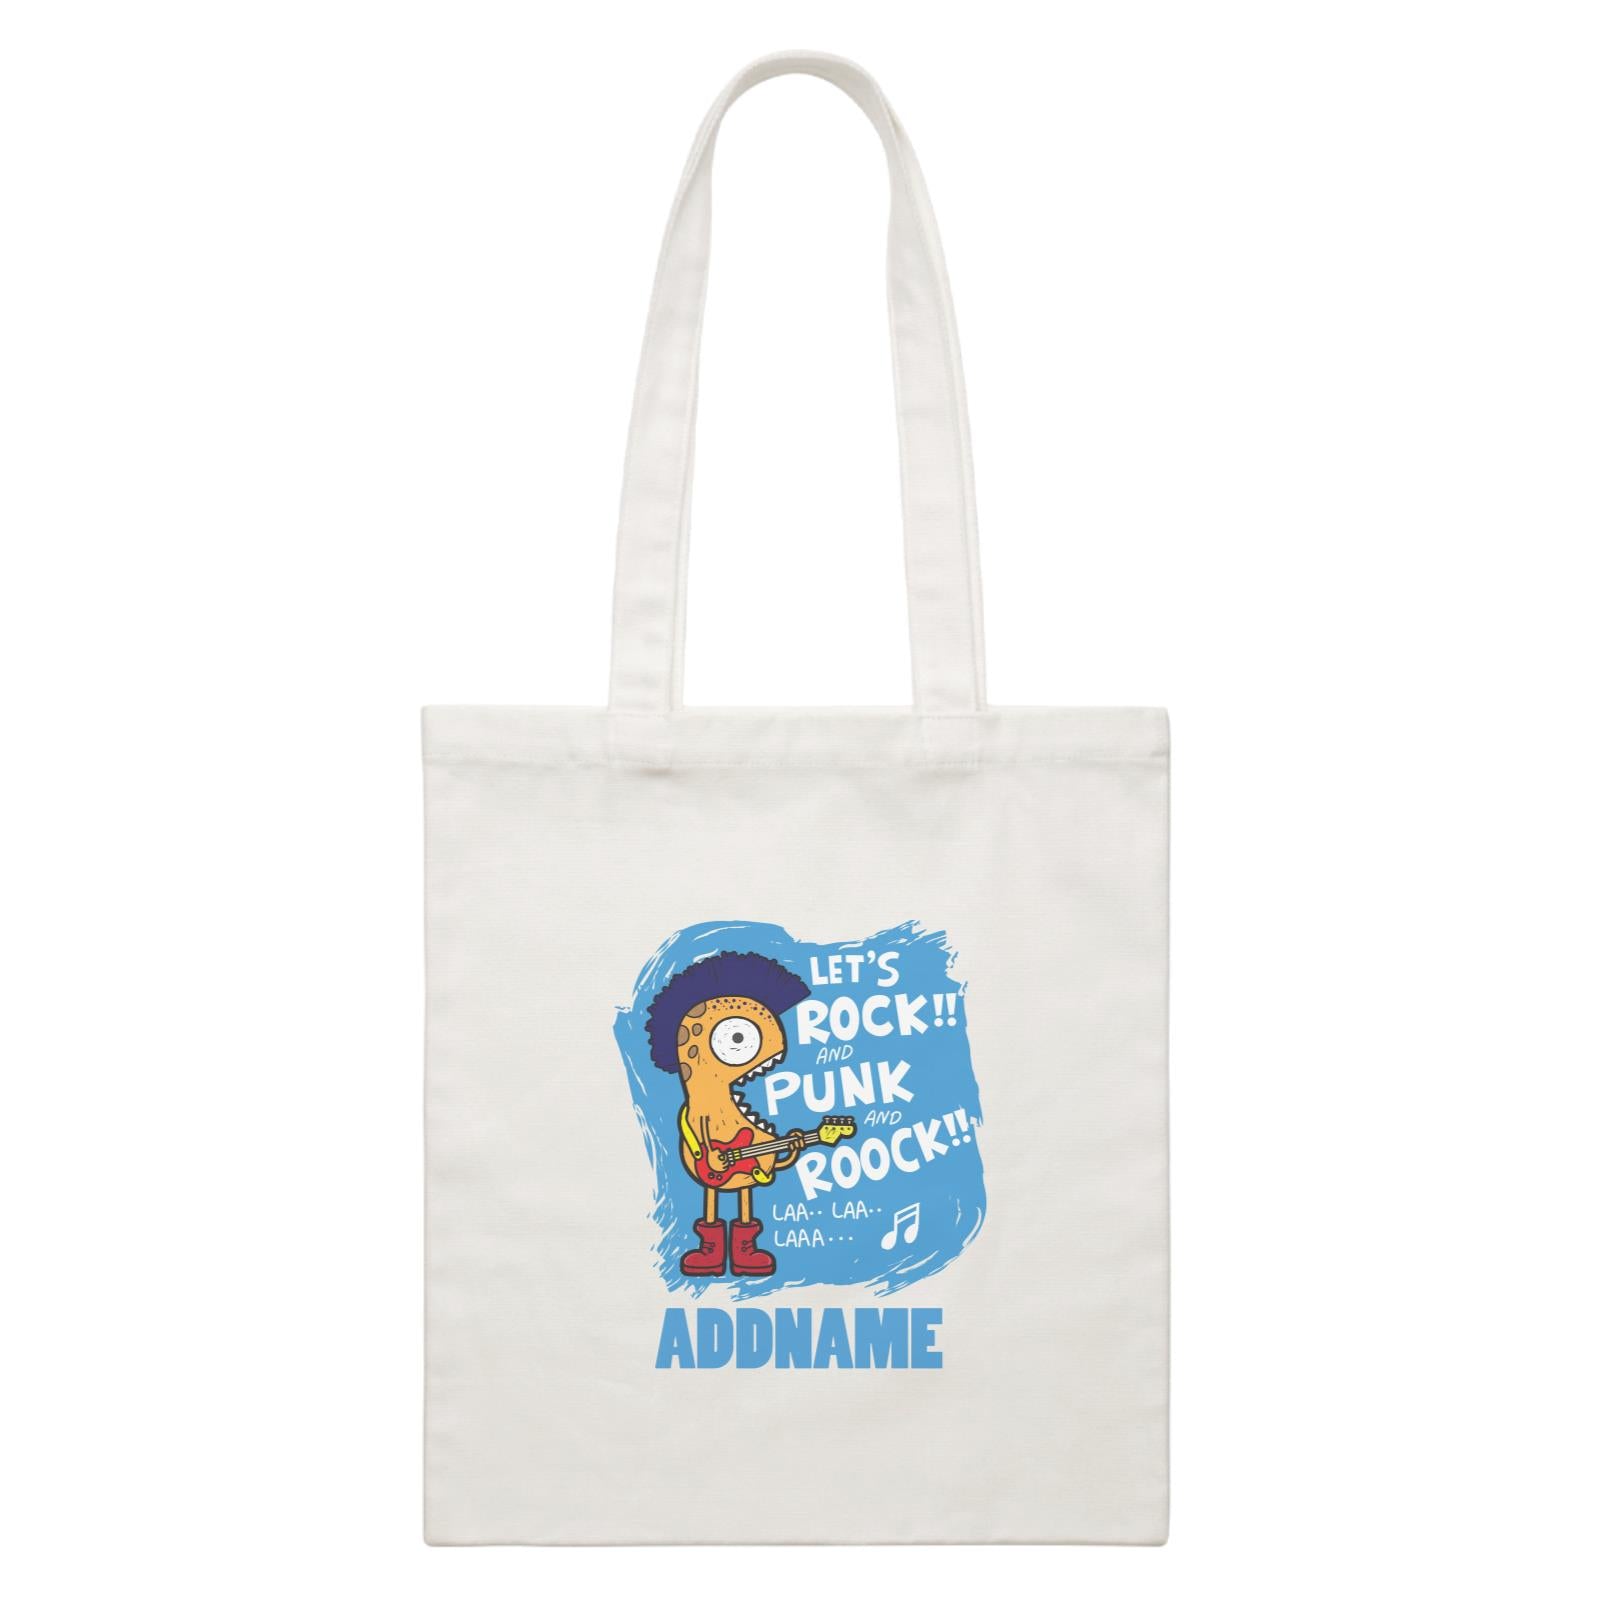 Cool Cute Monster Let's Rock And Punk And Roock Monster Addname White Canvas Bag